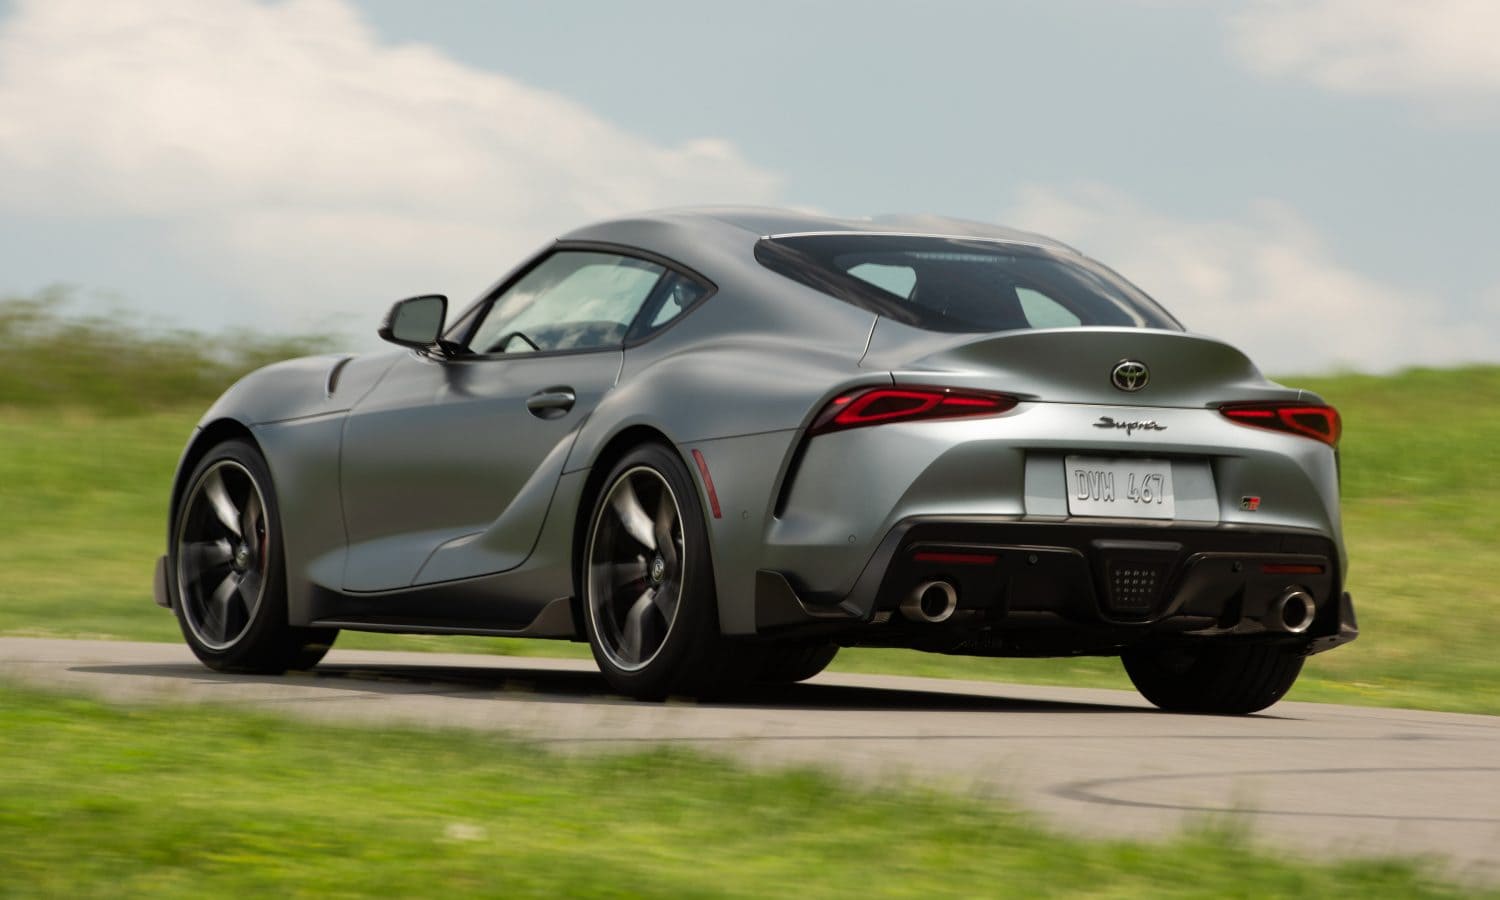 Why Is the Toyota Supra Popular?